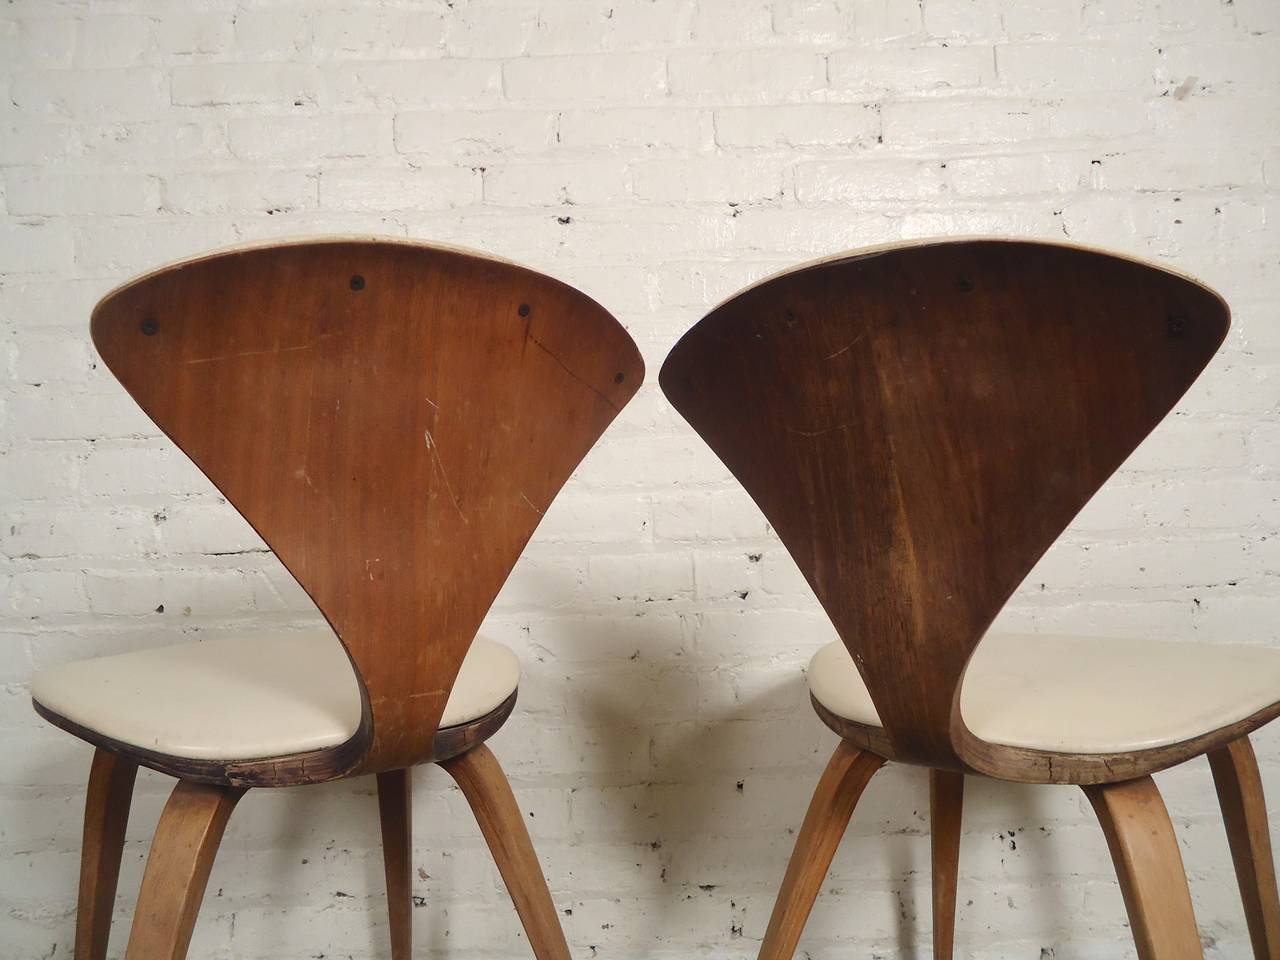 Pair of Norman Cherner Chairs by Plycraft 1